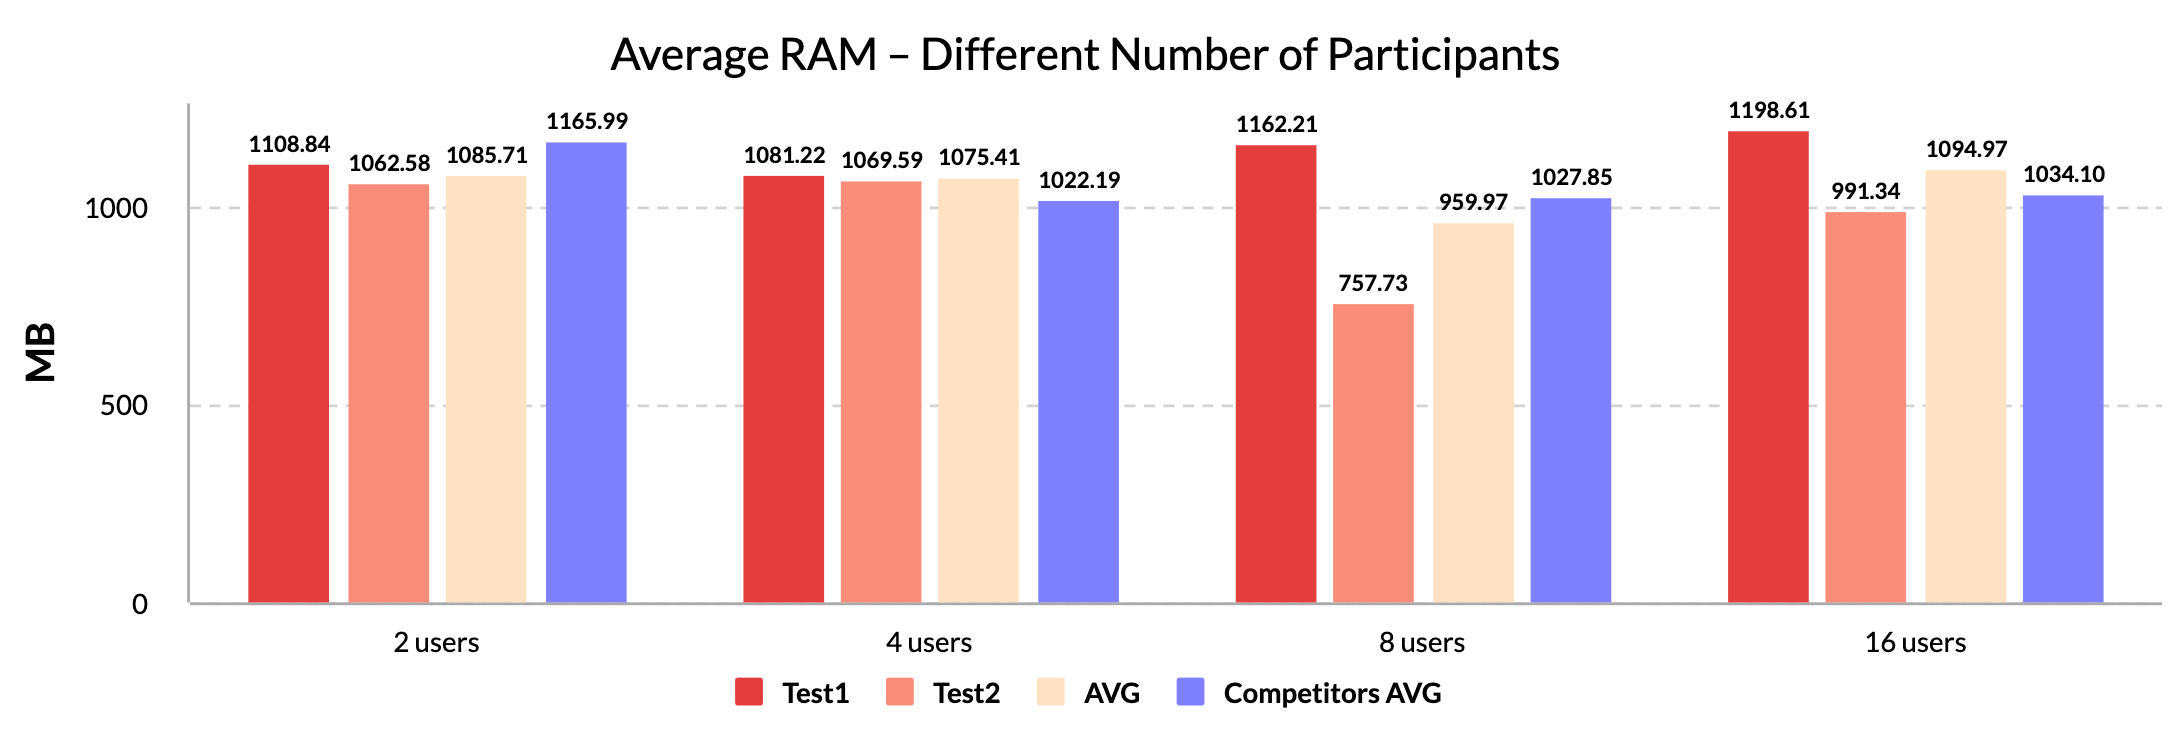 Average RAM - Different Number of Participants